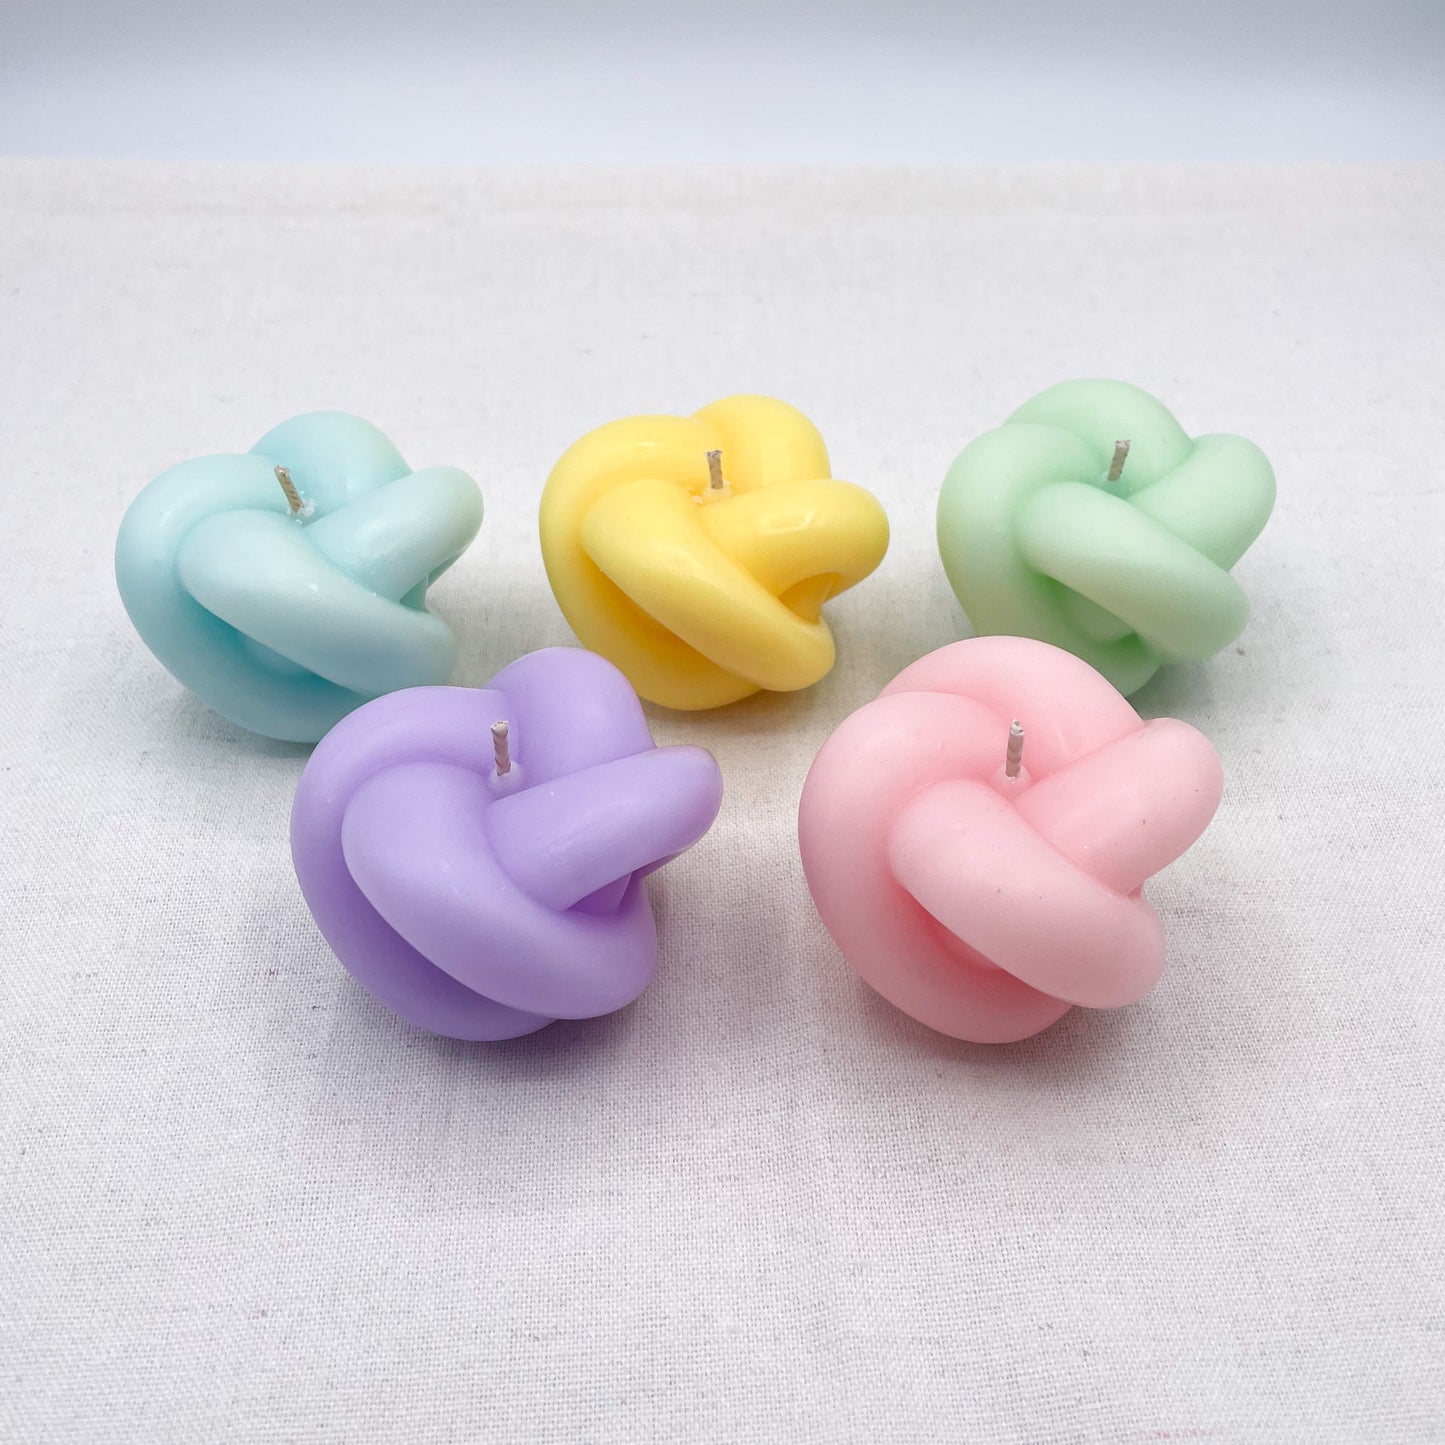 Pastel knot candles